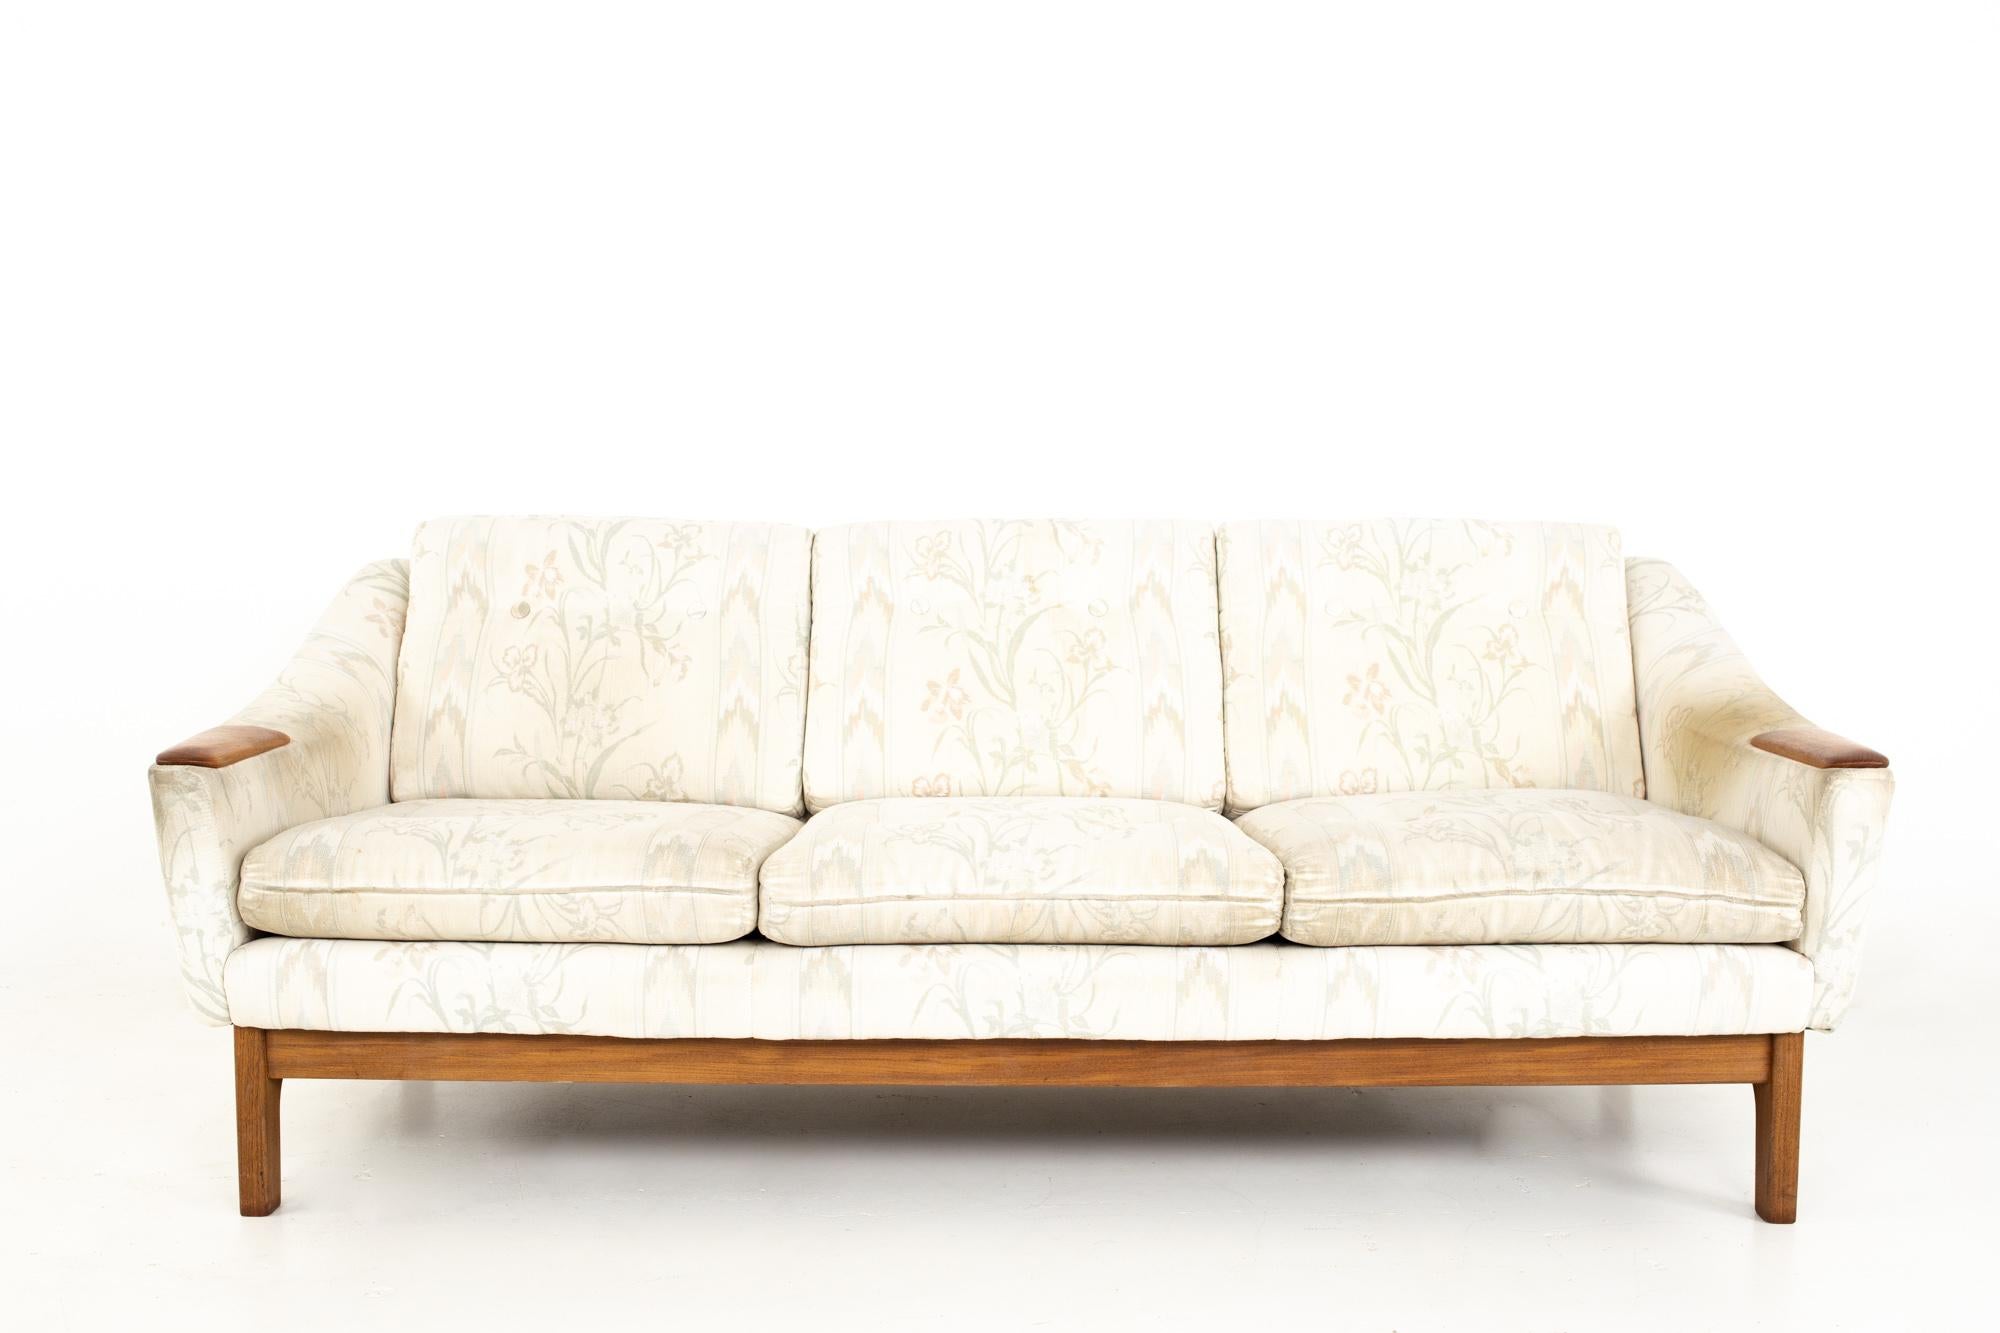 DUX mid-century teak upholstered sofa.

Sofa measures: 75.5 wide x 33 deep x 28.5 high, with a seat height of 17 inches 

All pieces of furniture can be had in what we call restored vintage condition. That means the piece is restored upon